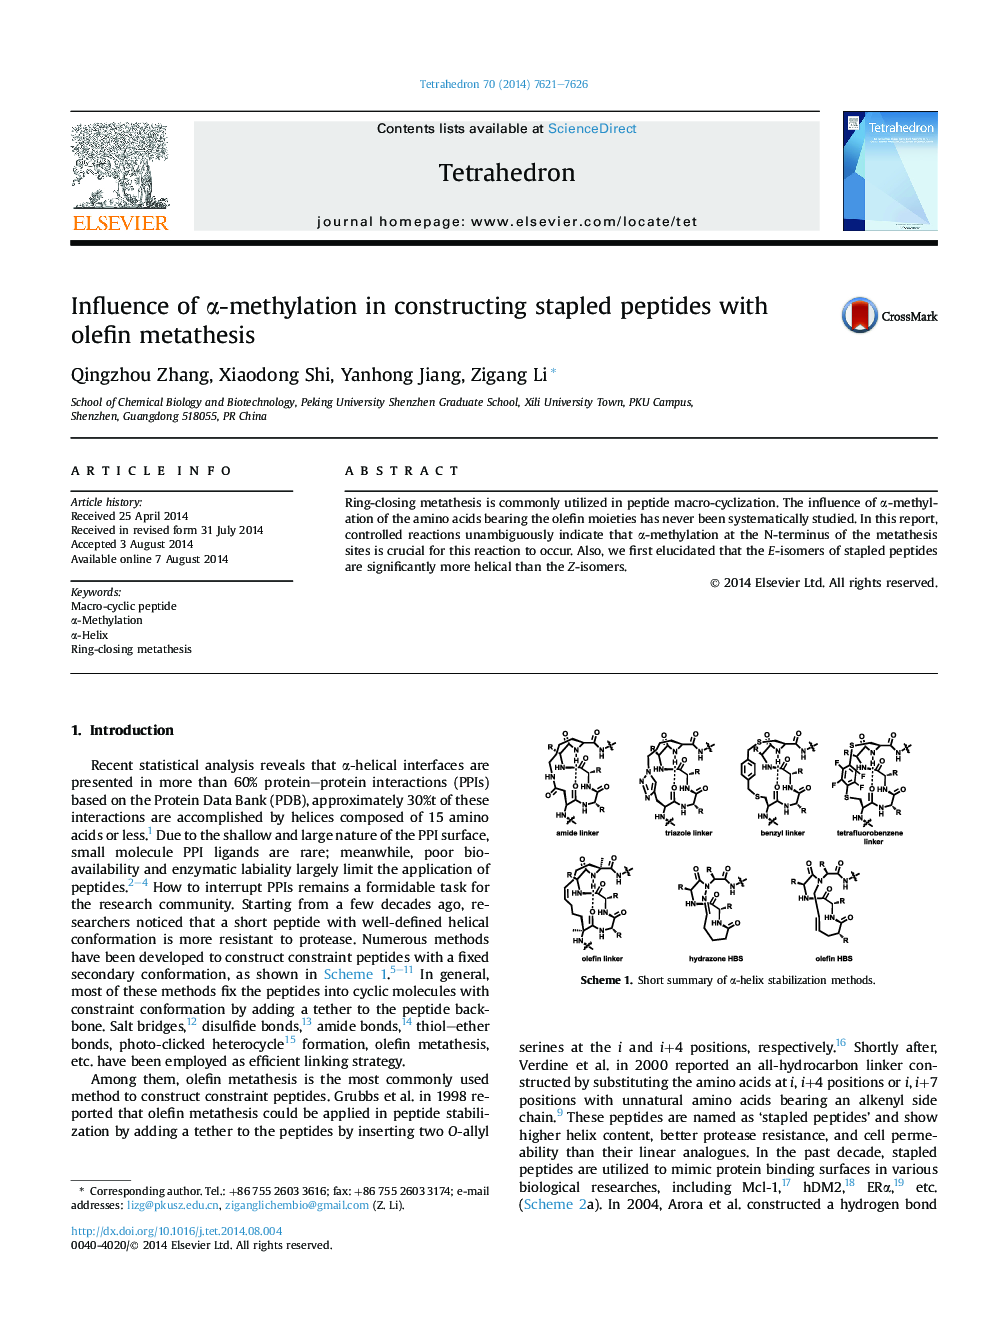 Influence of Î±-methylation in constructing stapled peptides with olefin metathesis